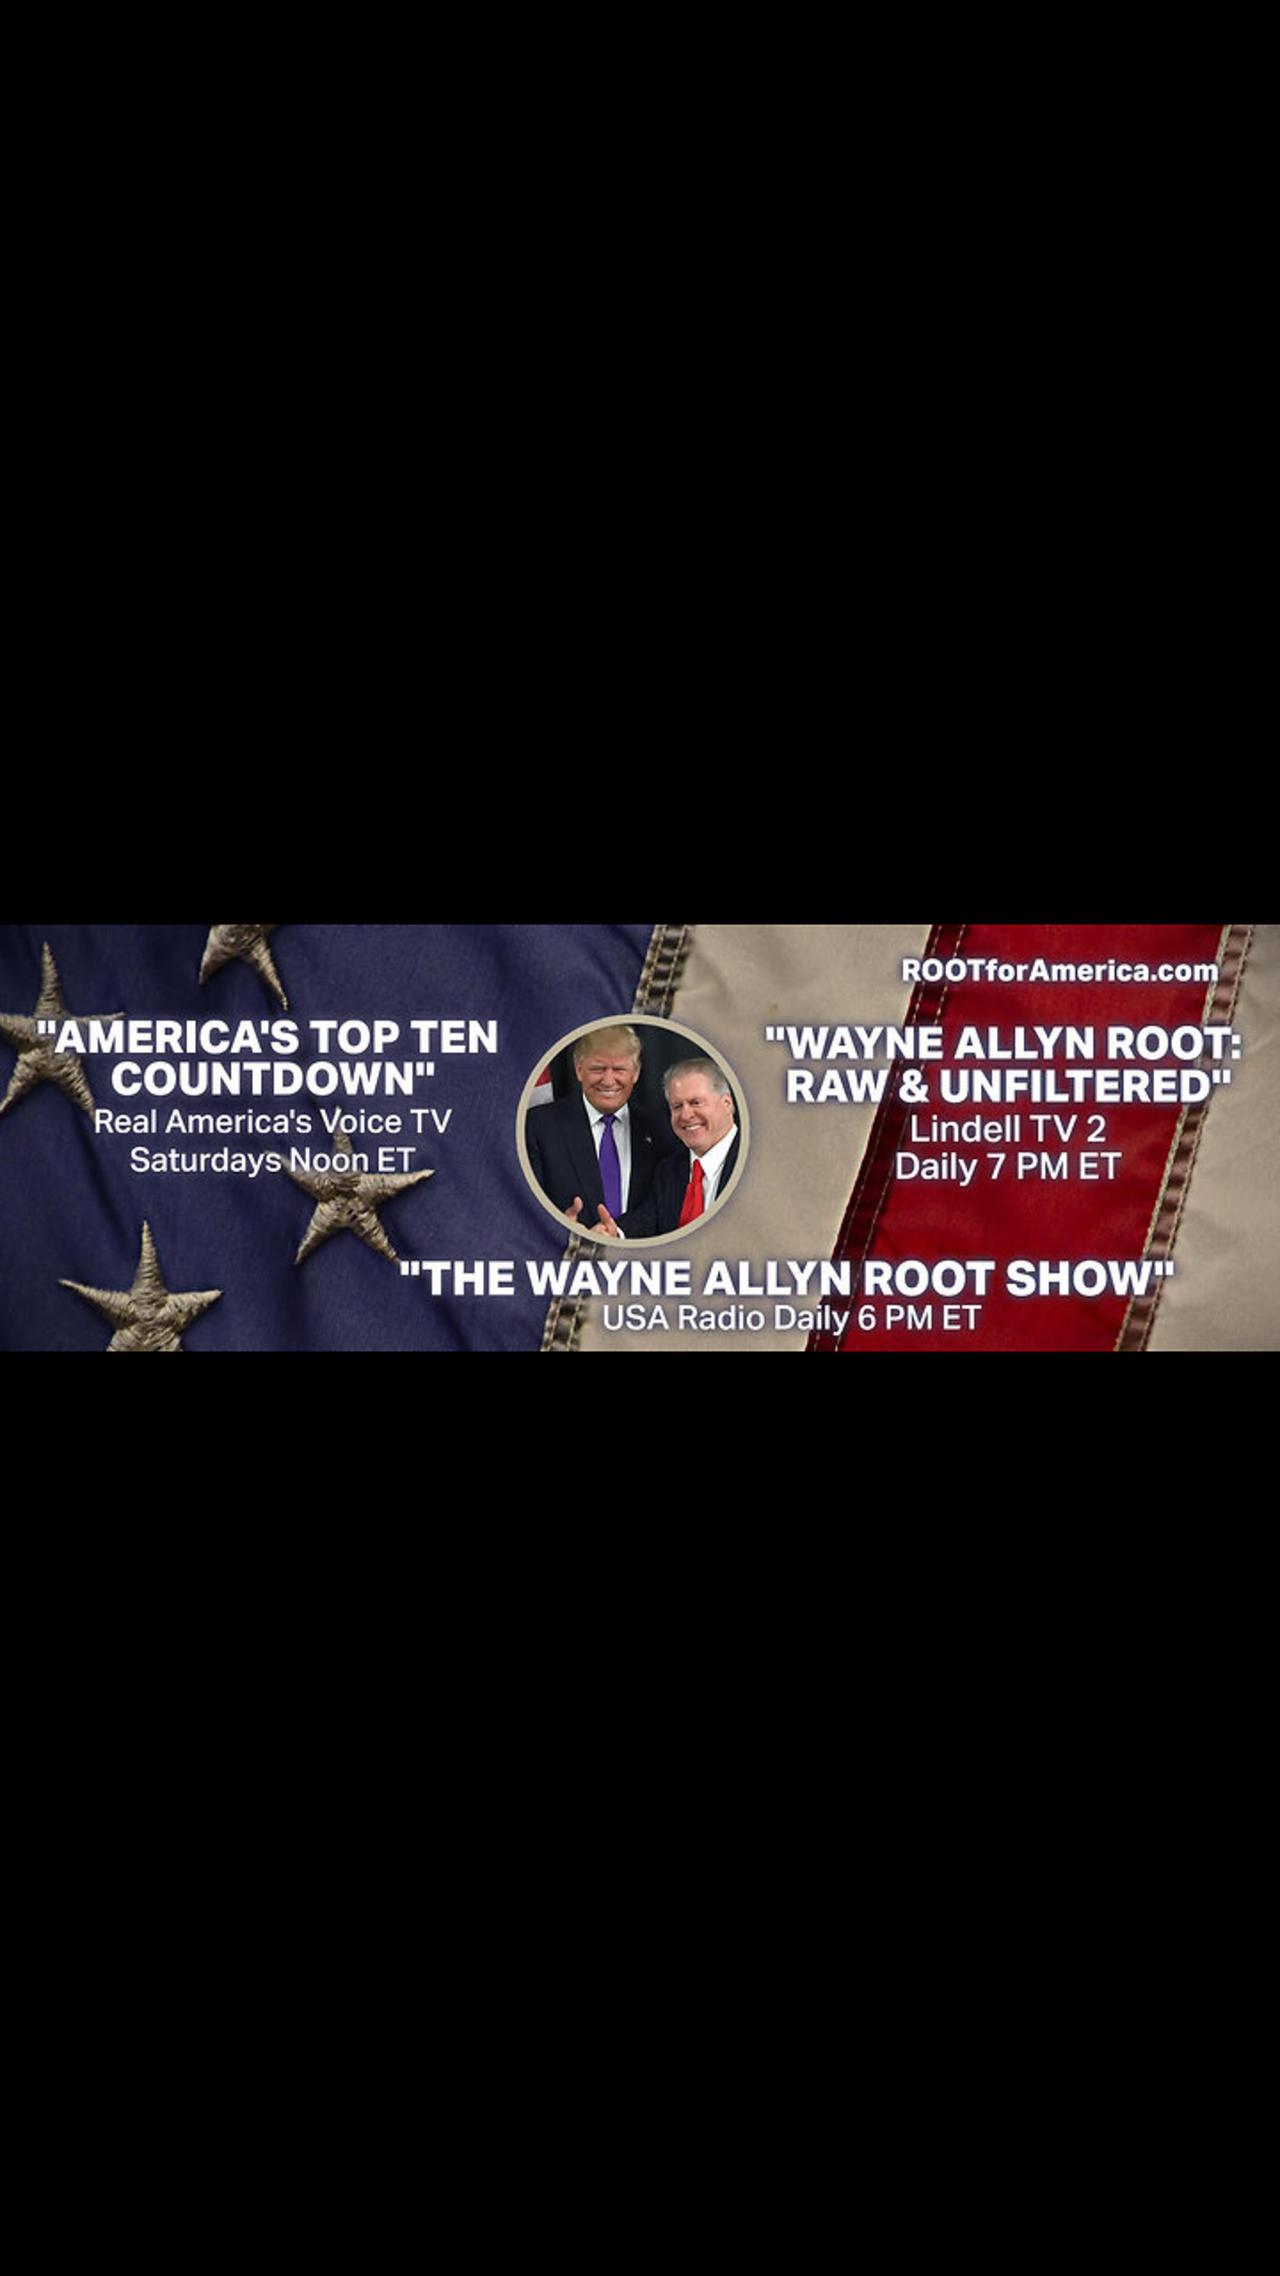 Wayne Allyn Root Raw & Unfiltered